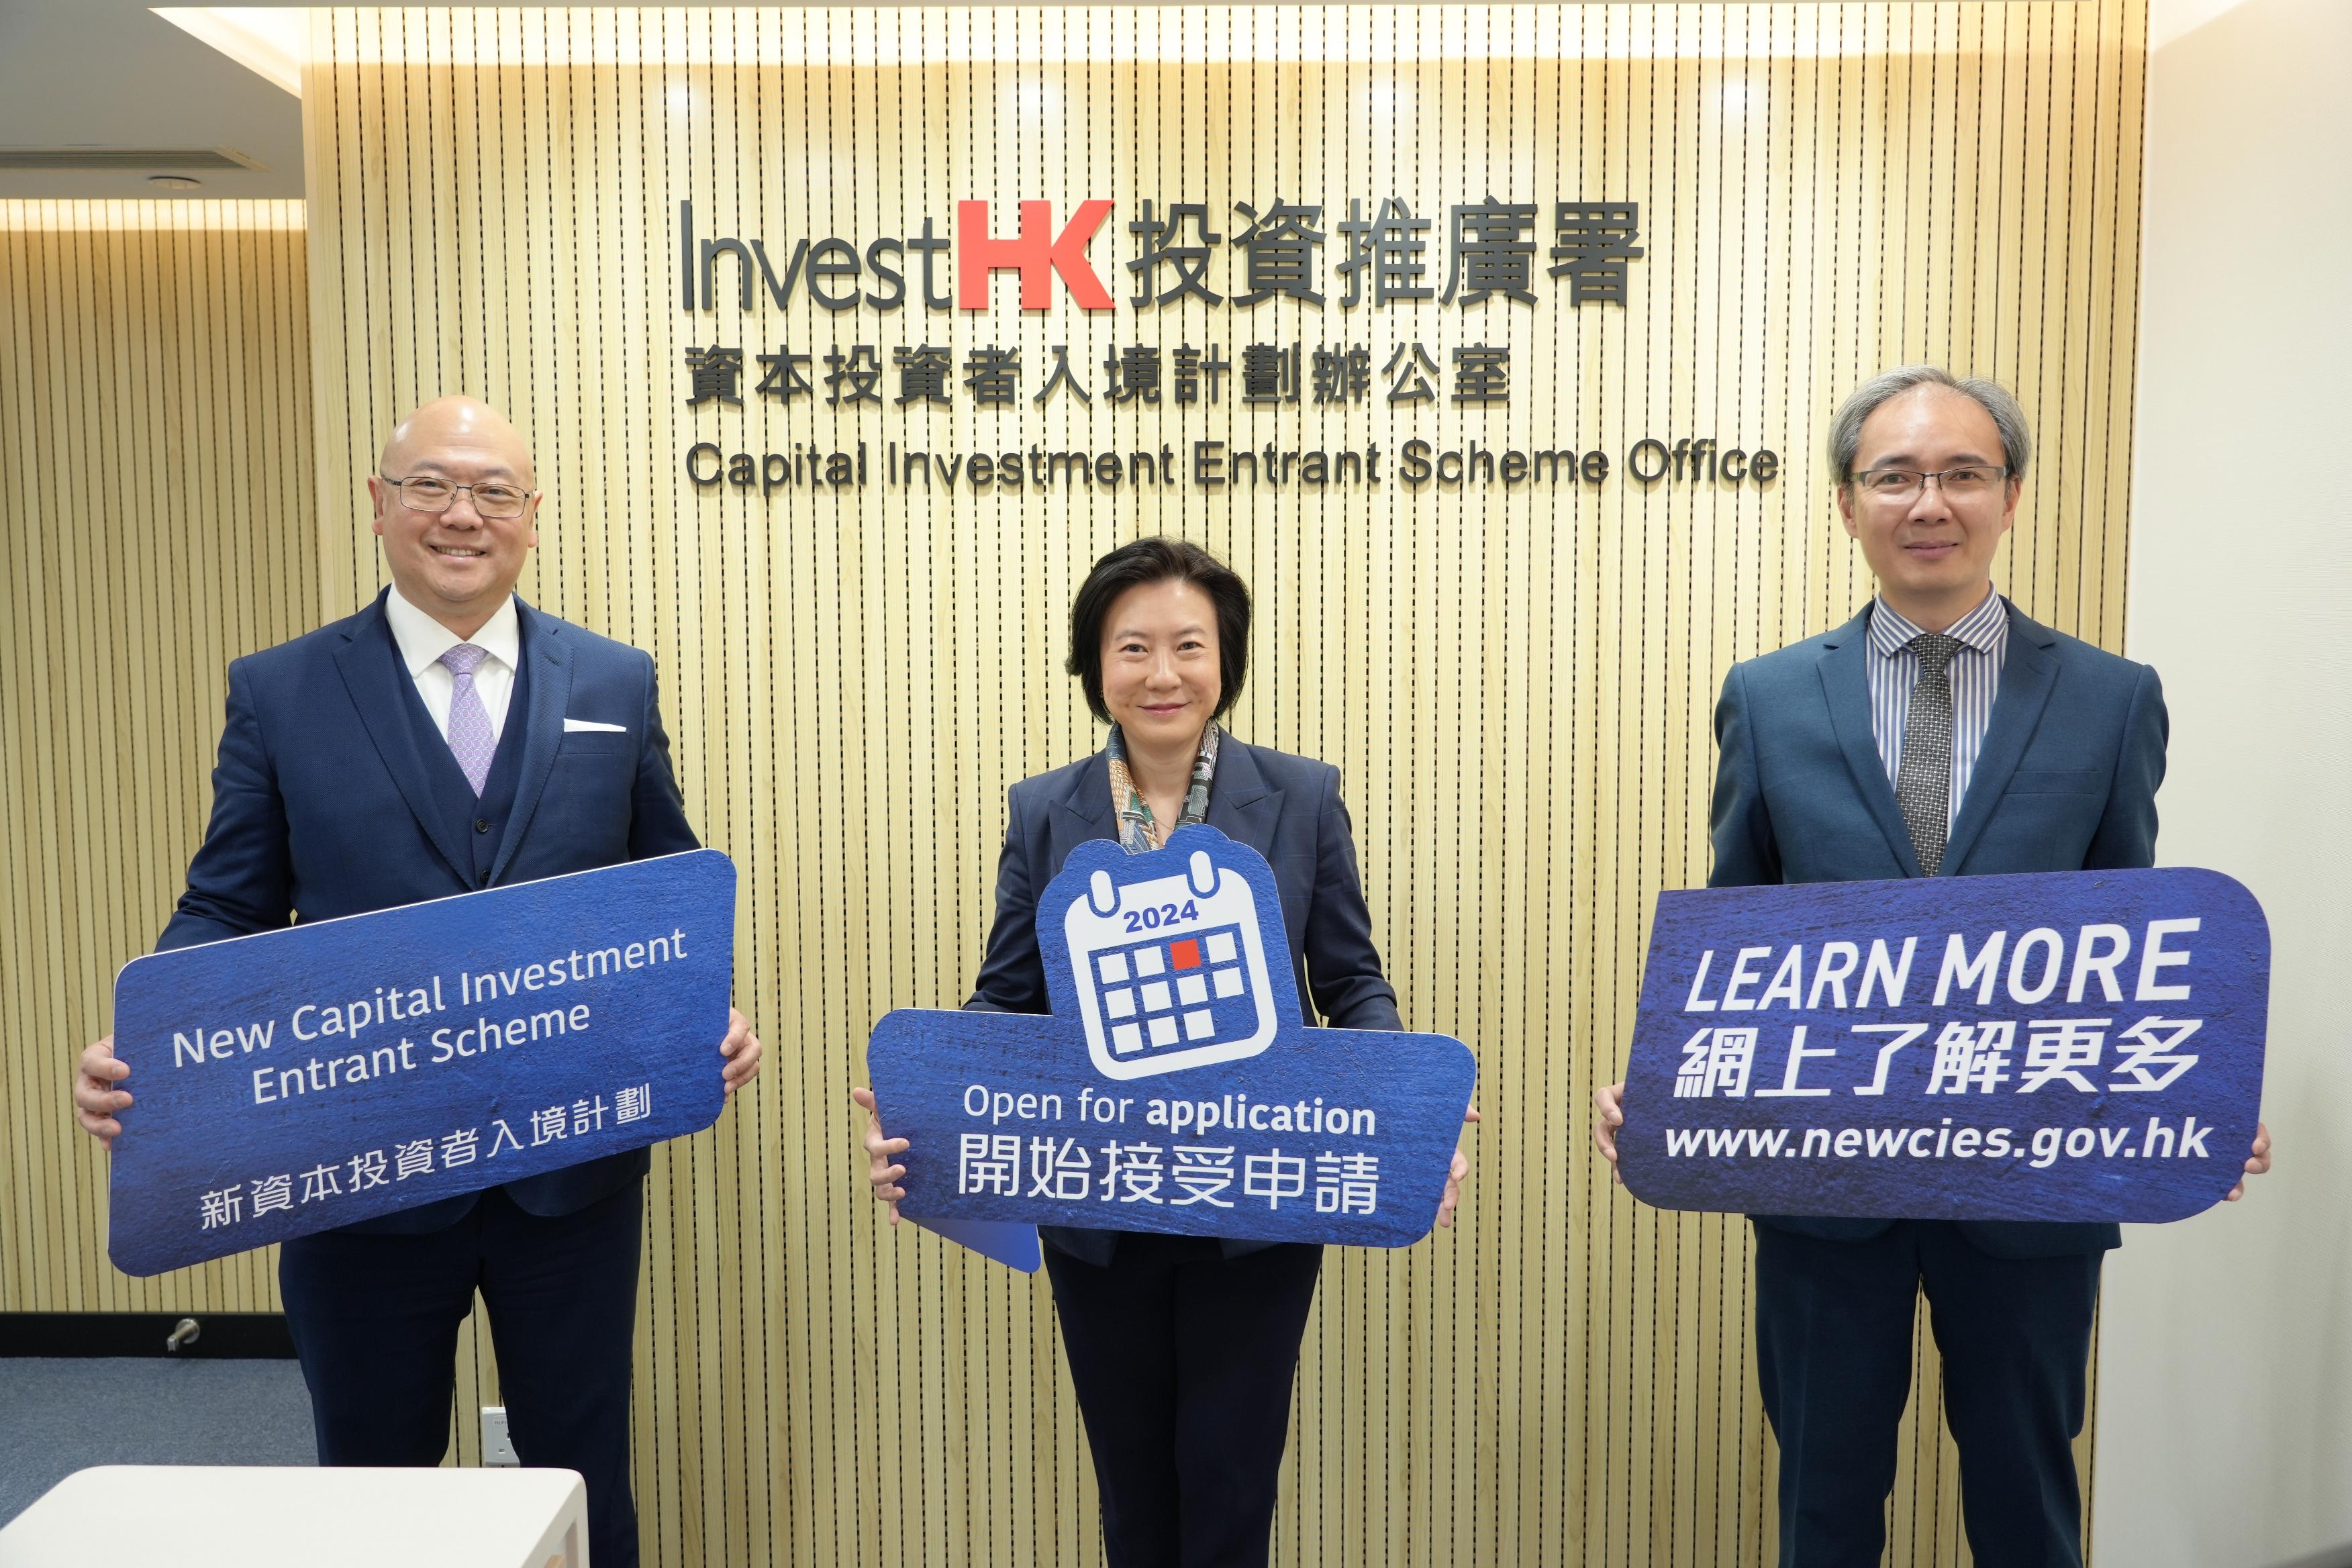 The new Capital Investment Entrant Scheme is open for application today (March 1). Photo shows the Director-General of Investment Promotion, Ms Alpha Lau (centre); Associate Director-General of Investment Promotion Mr Charles Ng (left); and the Chief Executive Officer (New Capital Investment Entrant Scheme Office), Mr Joseph Yu (right) at the office. 